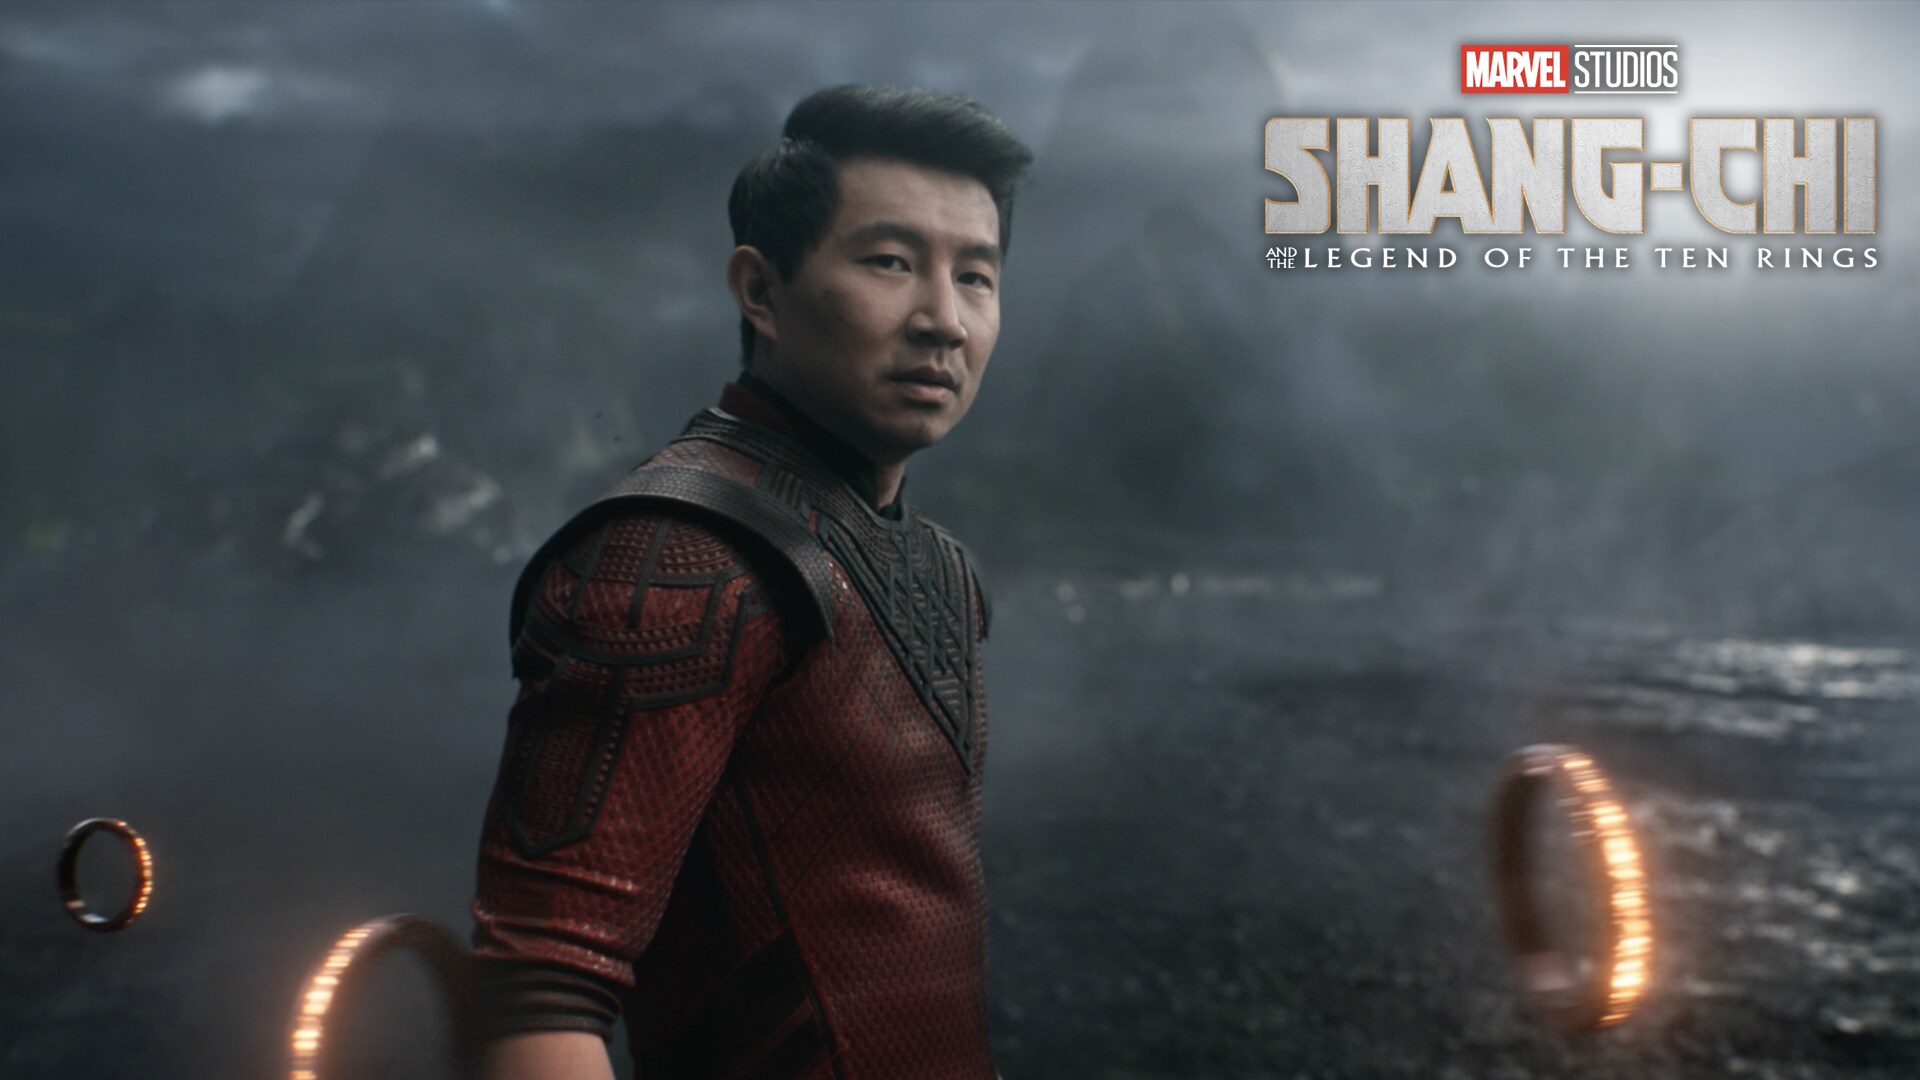 Breath | Marvel Studios’ Shang-Chi and the Legend of the Ten Rings